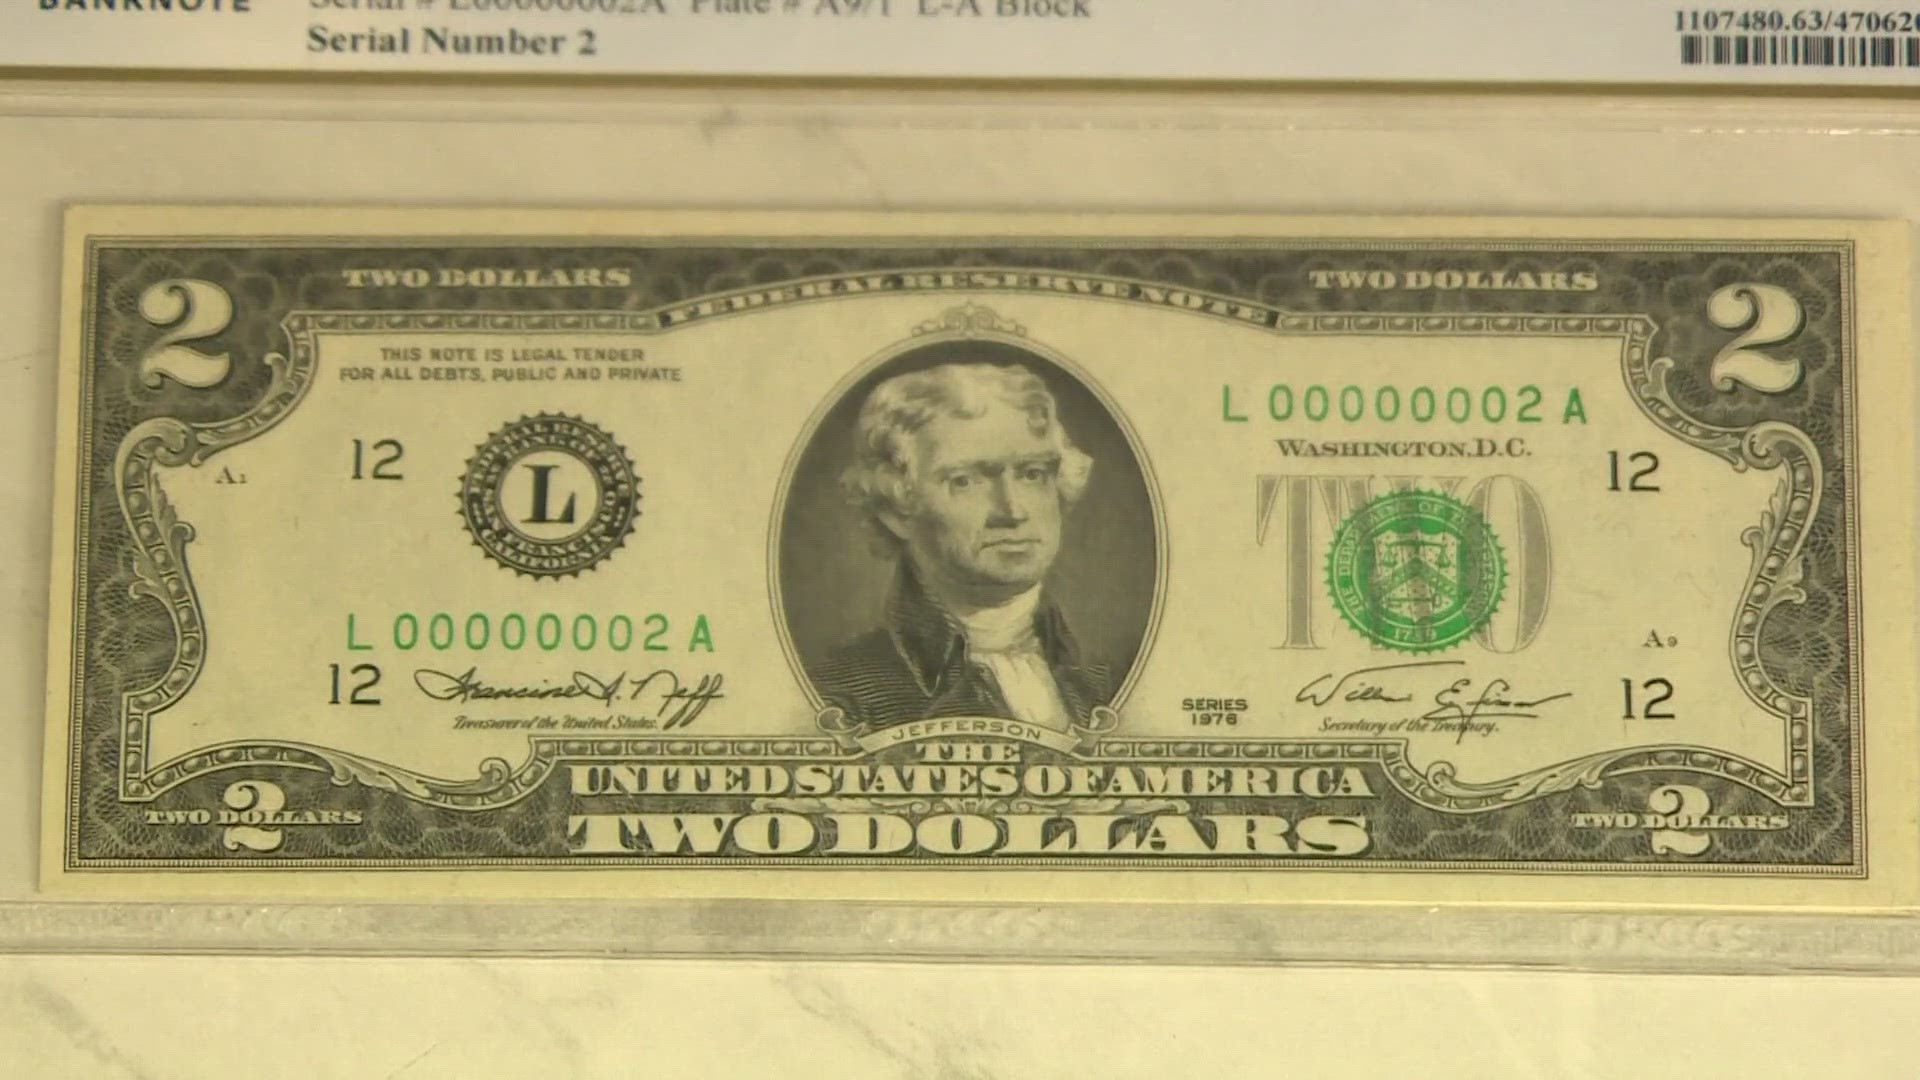 Two-dollar bill sold for thousands at auction goes viral